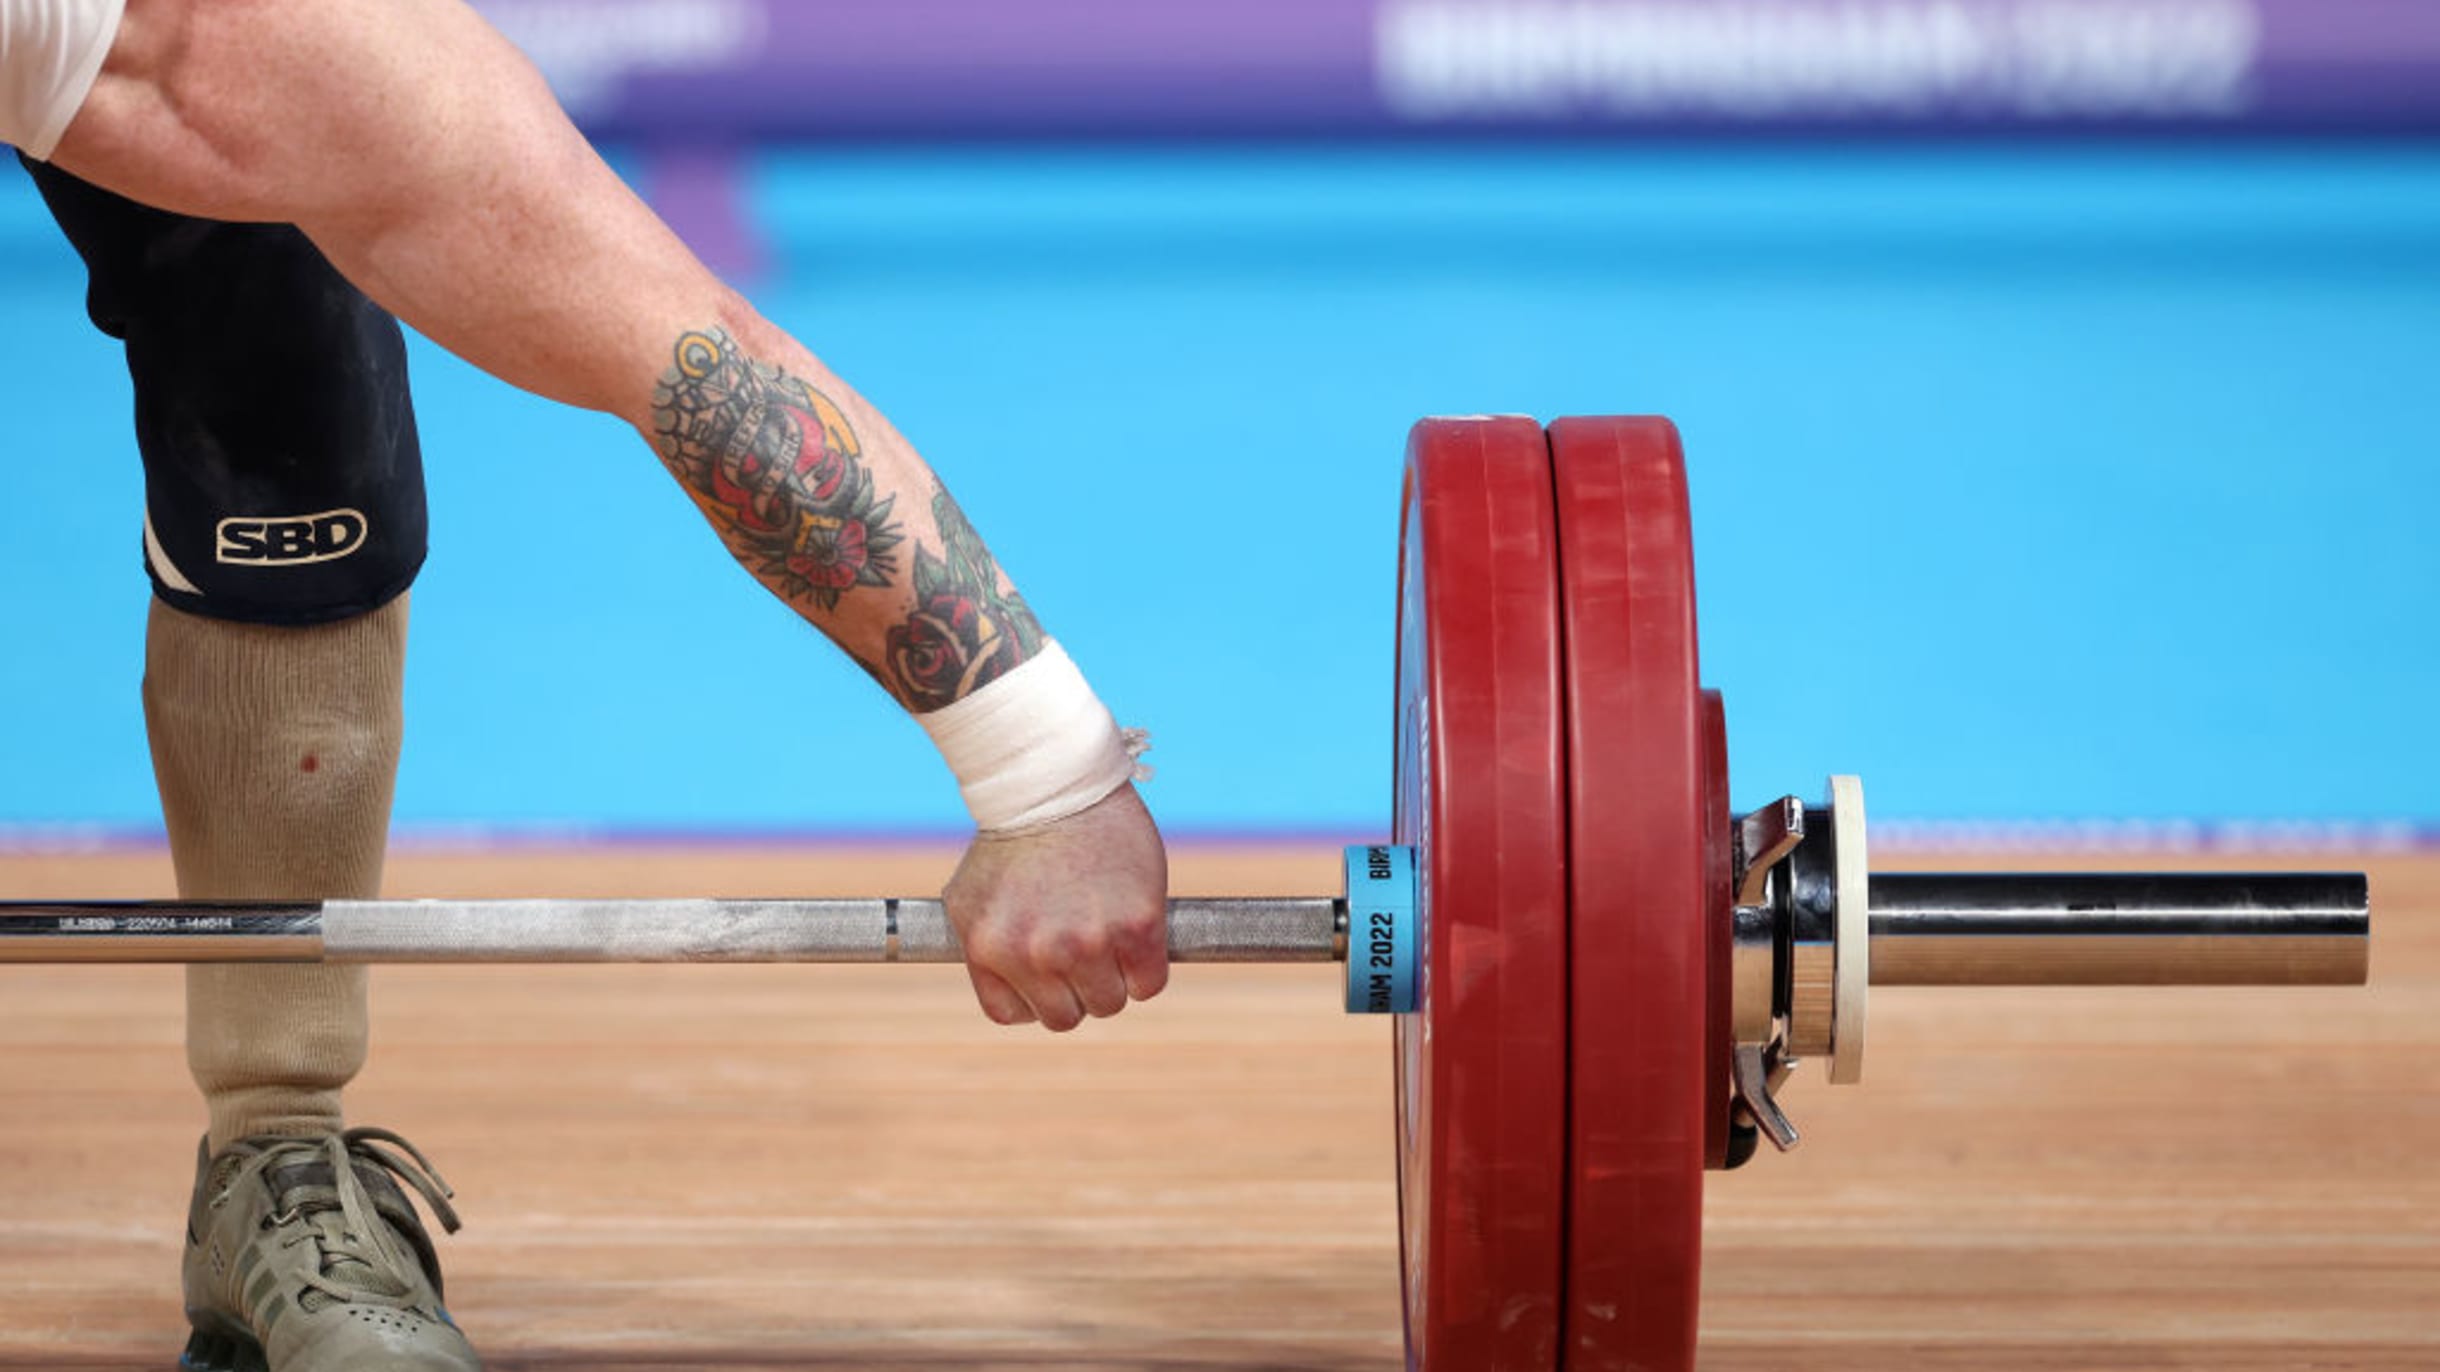 2022 World Weightlifting Championships in Bogota Schedule, how to watch and preview